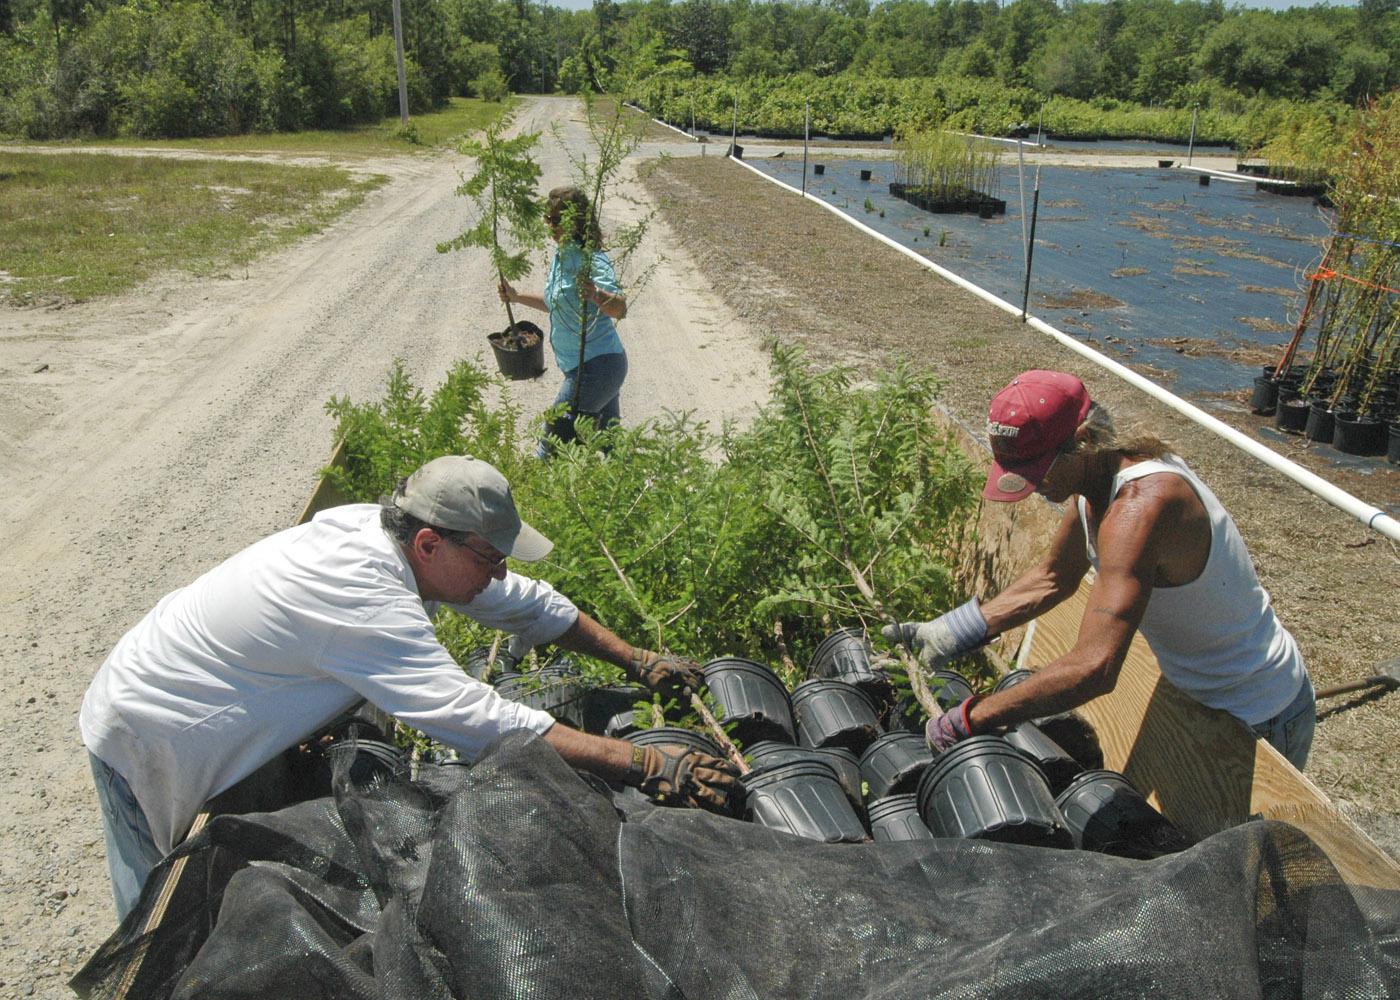 From left, Jim Kelly, restoration expert for the Land Trust for the Mississippi Coastal Plain, and Lavell Mitchell, nurseryman, load RPM trees grown at Young's Nursery in Vancleave while Laura Bowie, Land Trust watershed outreach coordinator, carries more over in this April 23 photo. (Photo by Bonnie Coblentz)